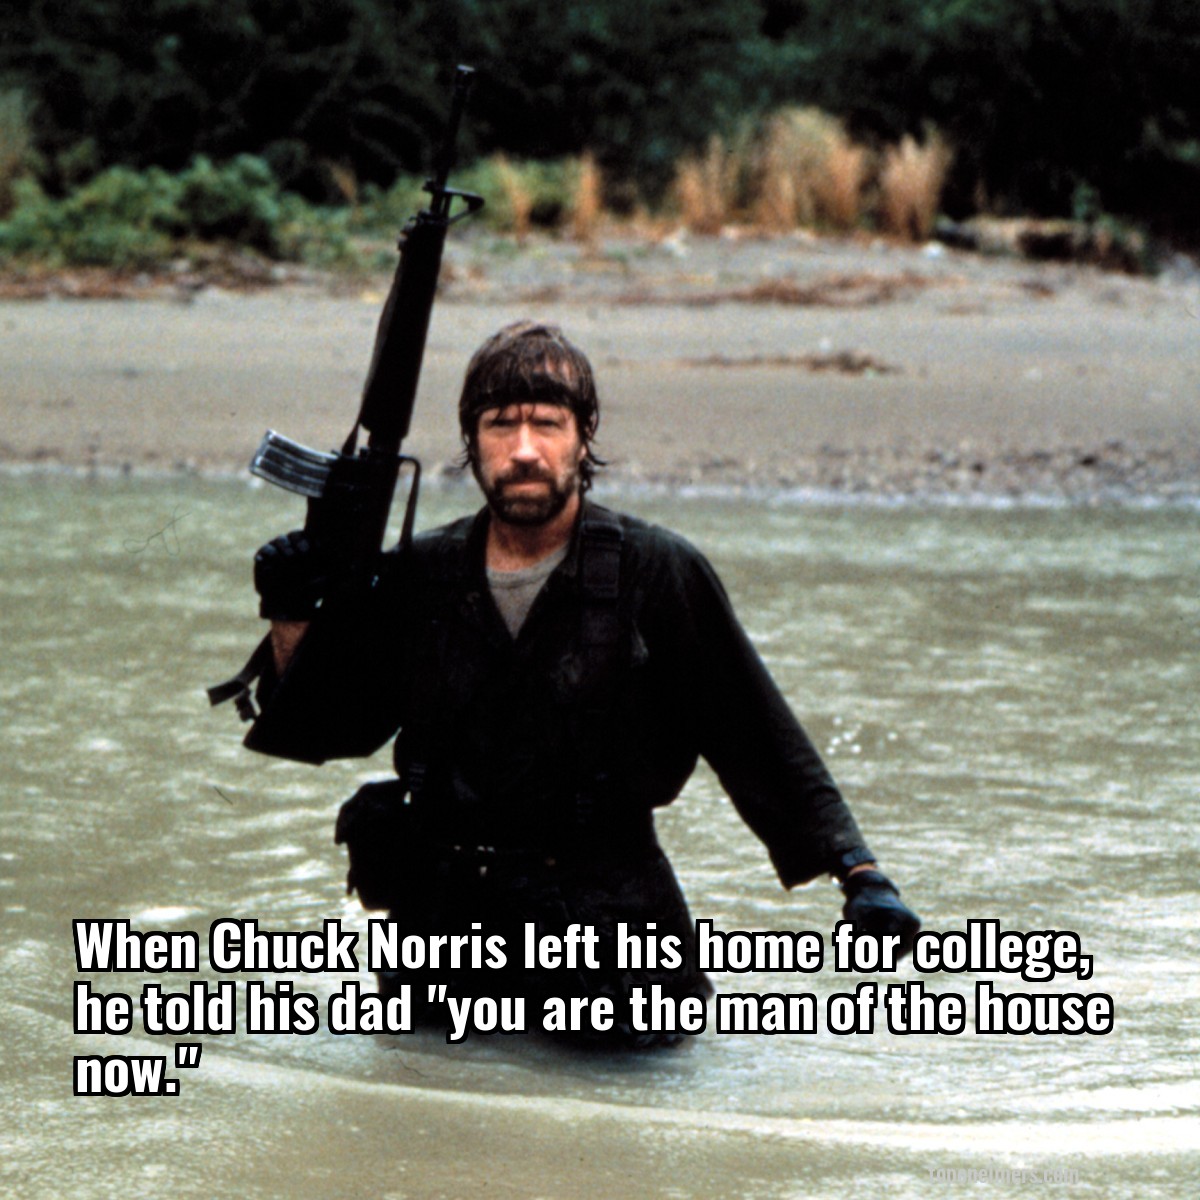 When Chuck Norris left his home for college, he told his dad "you are the man of the house now."